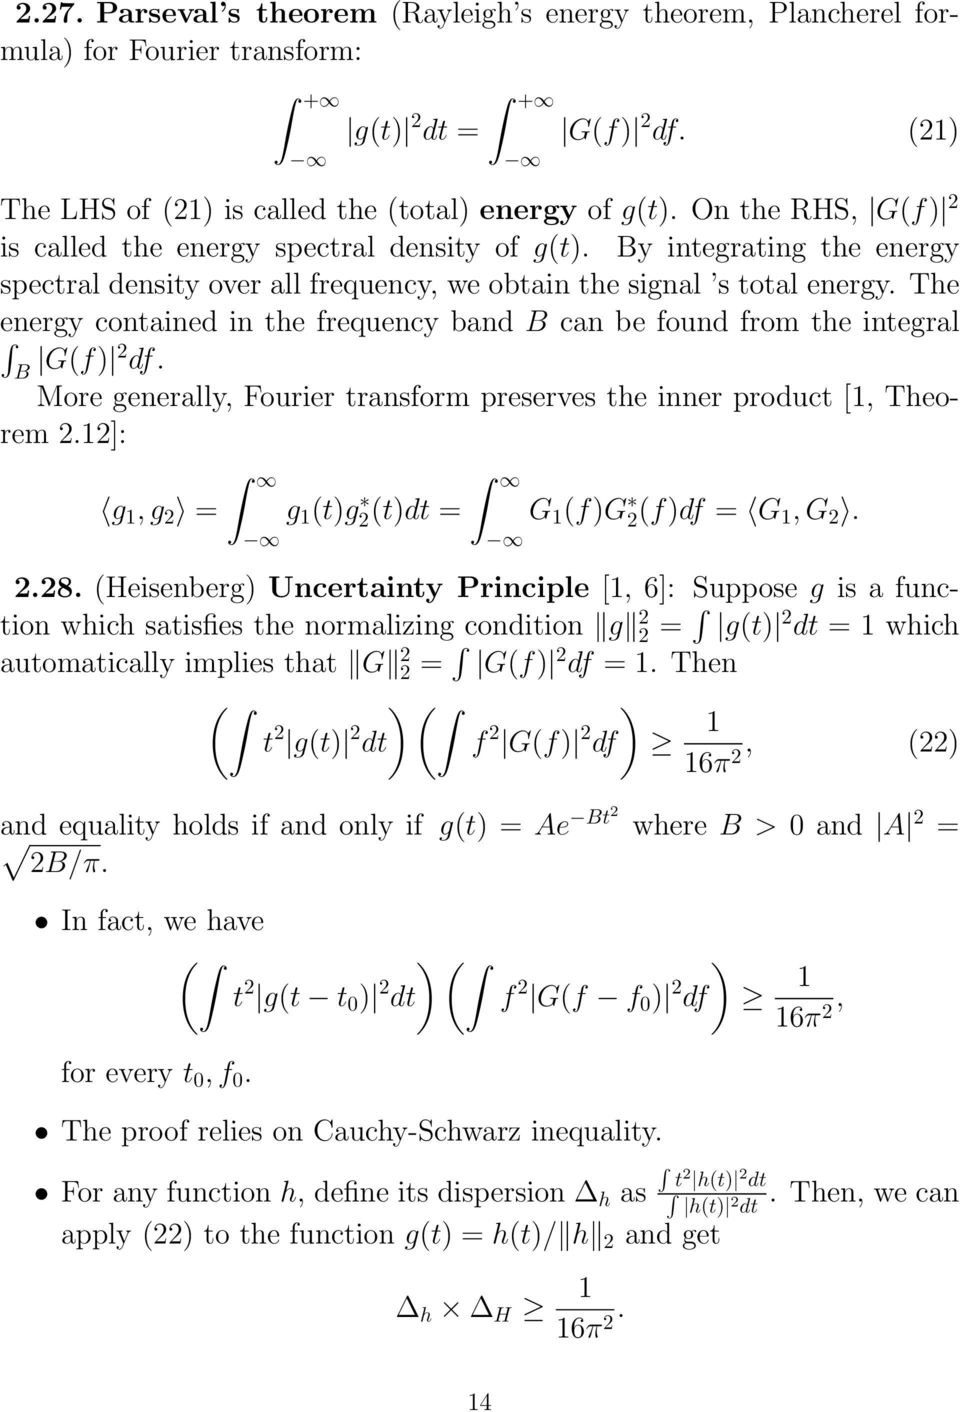 The energy contained in the frequency band B can be found from the integral B G(f) 2 df. More generally, ourier transform preserves the inner product [, Theorem 2.